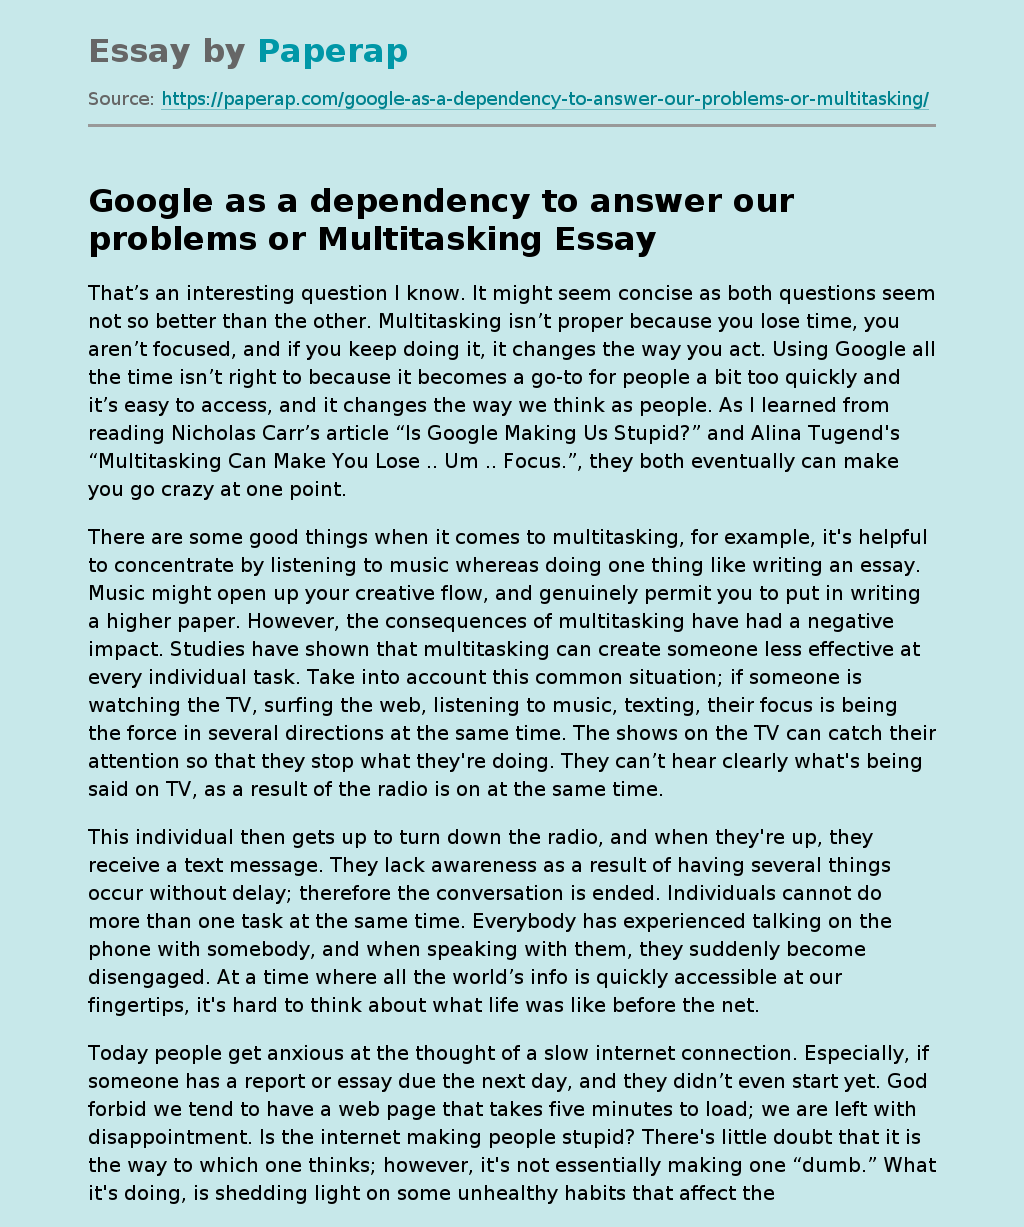 Google as a dependency to answer our problems or Multitasking